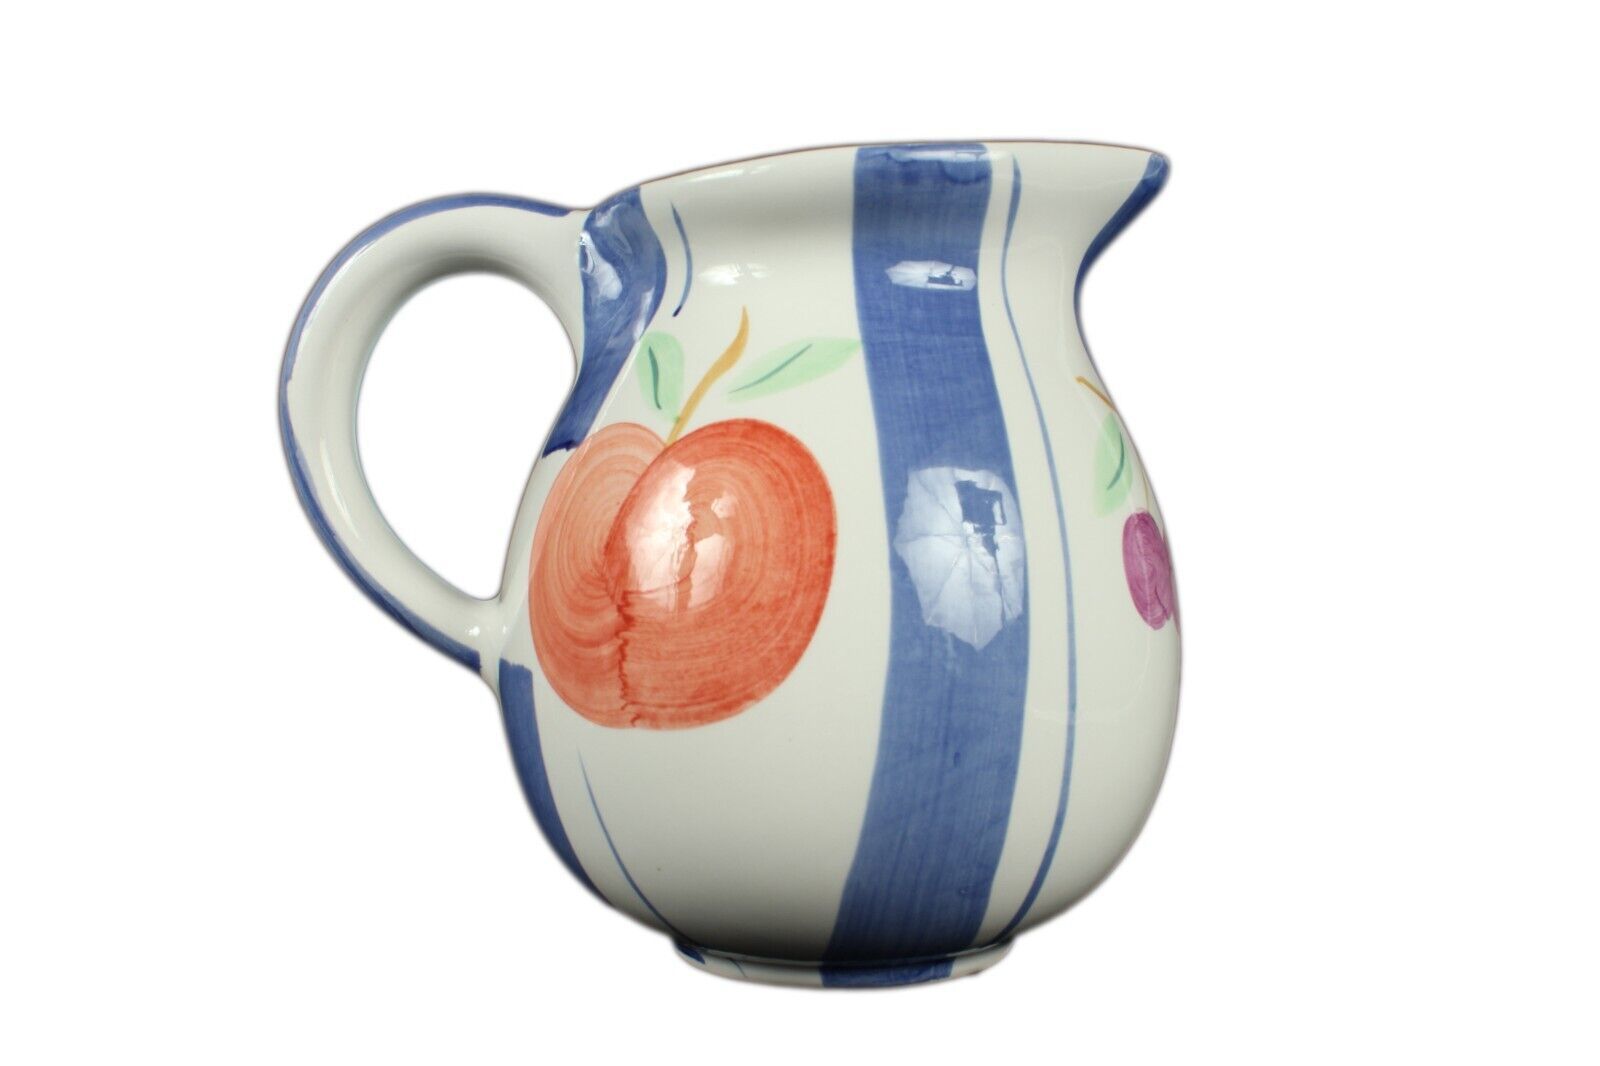 Primary image for 48 Oz Pitcher Harvest Fruit Artist s Touch Apples Pears Cherries Excellent